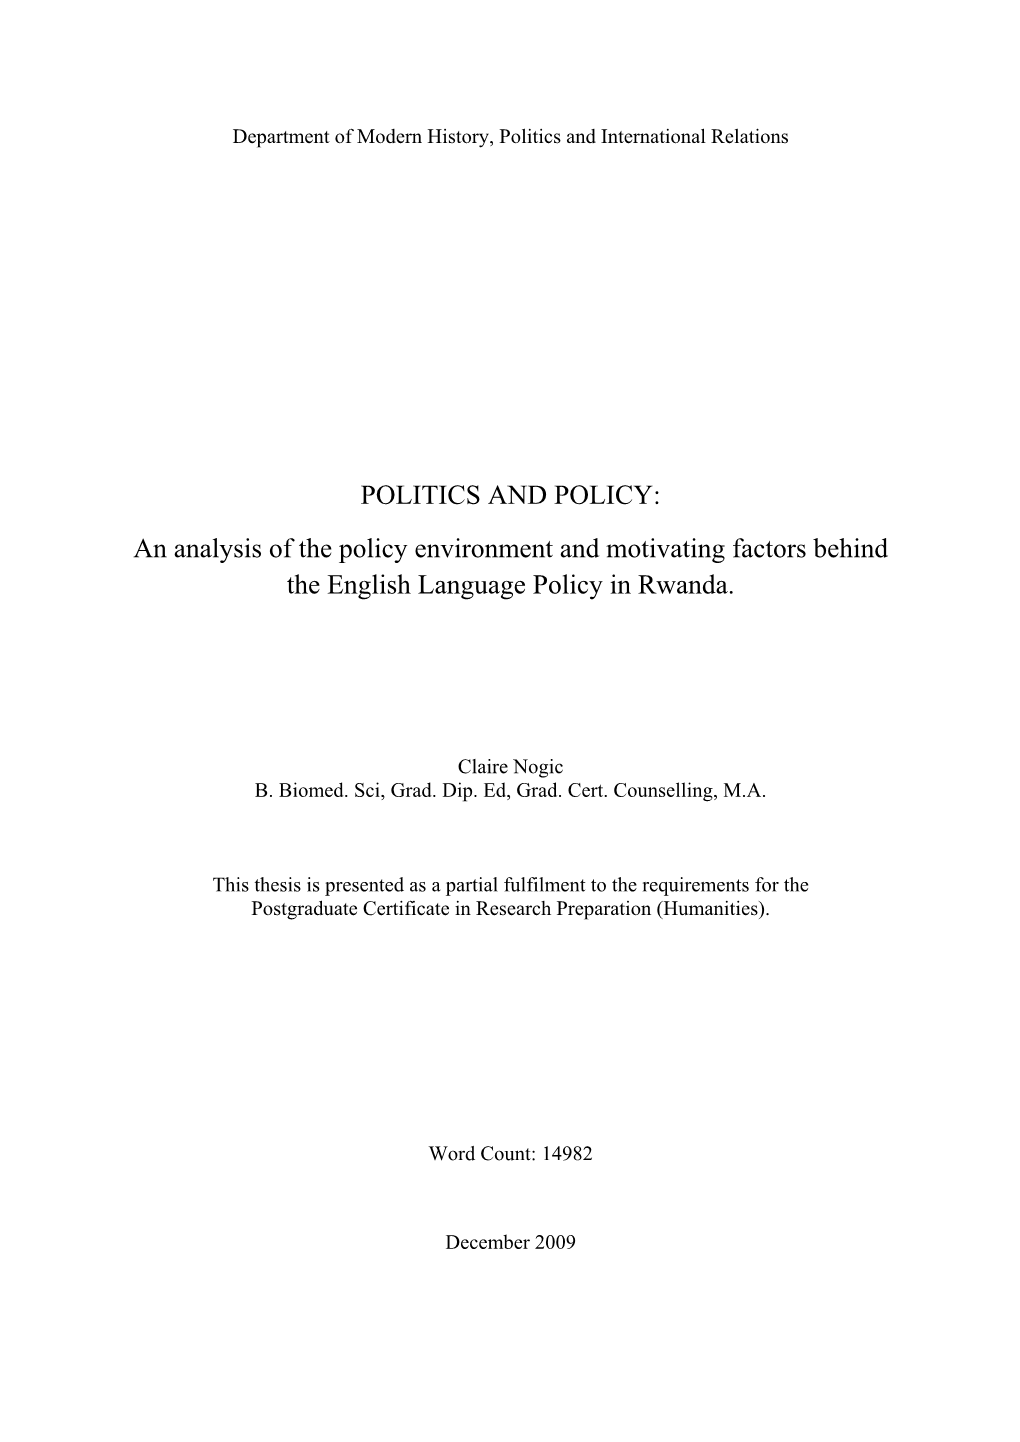 POLITICS and POLICY: an Analysis of the Policy Environment and Motivating Factors Behind the English Language Policy in Rwanda